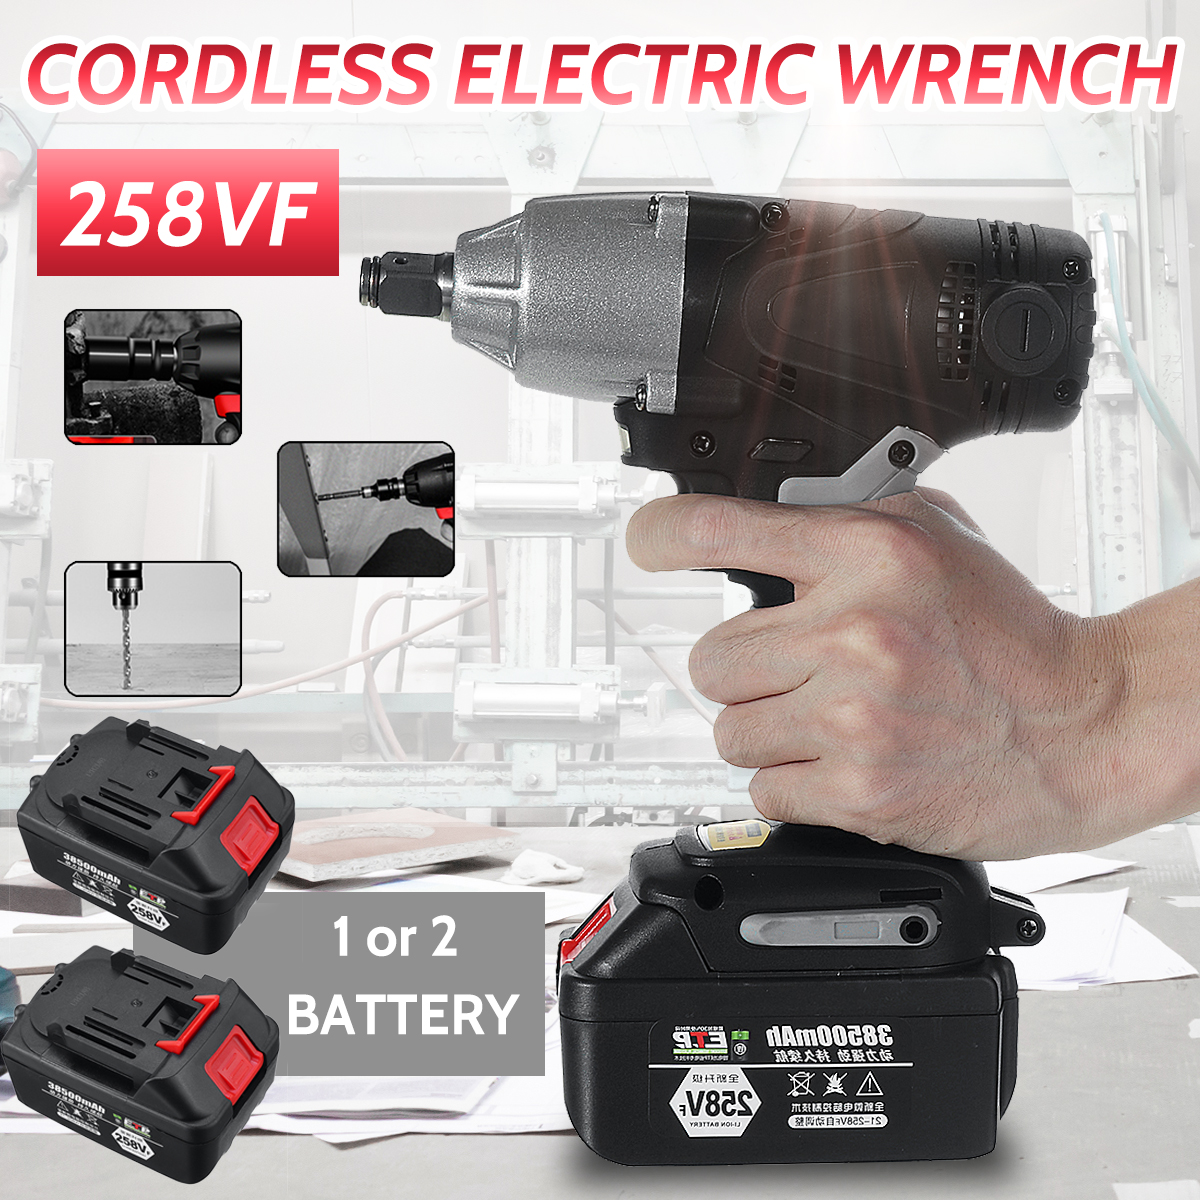 258VF-Cordless-Brushless-Electric-Impact-Wrench-Rechargeable-Wrench-Screwdriver-Power-Tool-W-12pcs-B-1839472-1